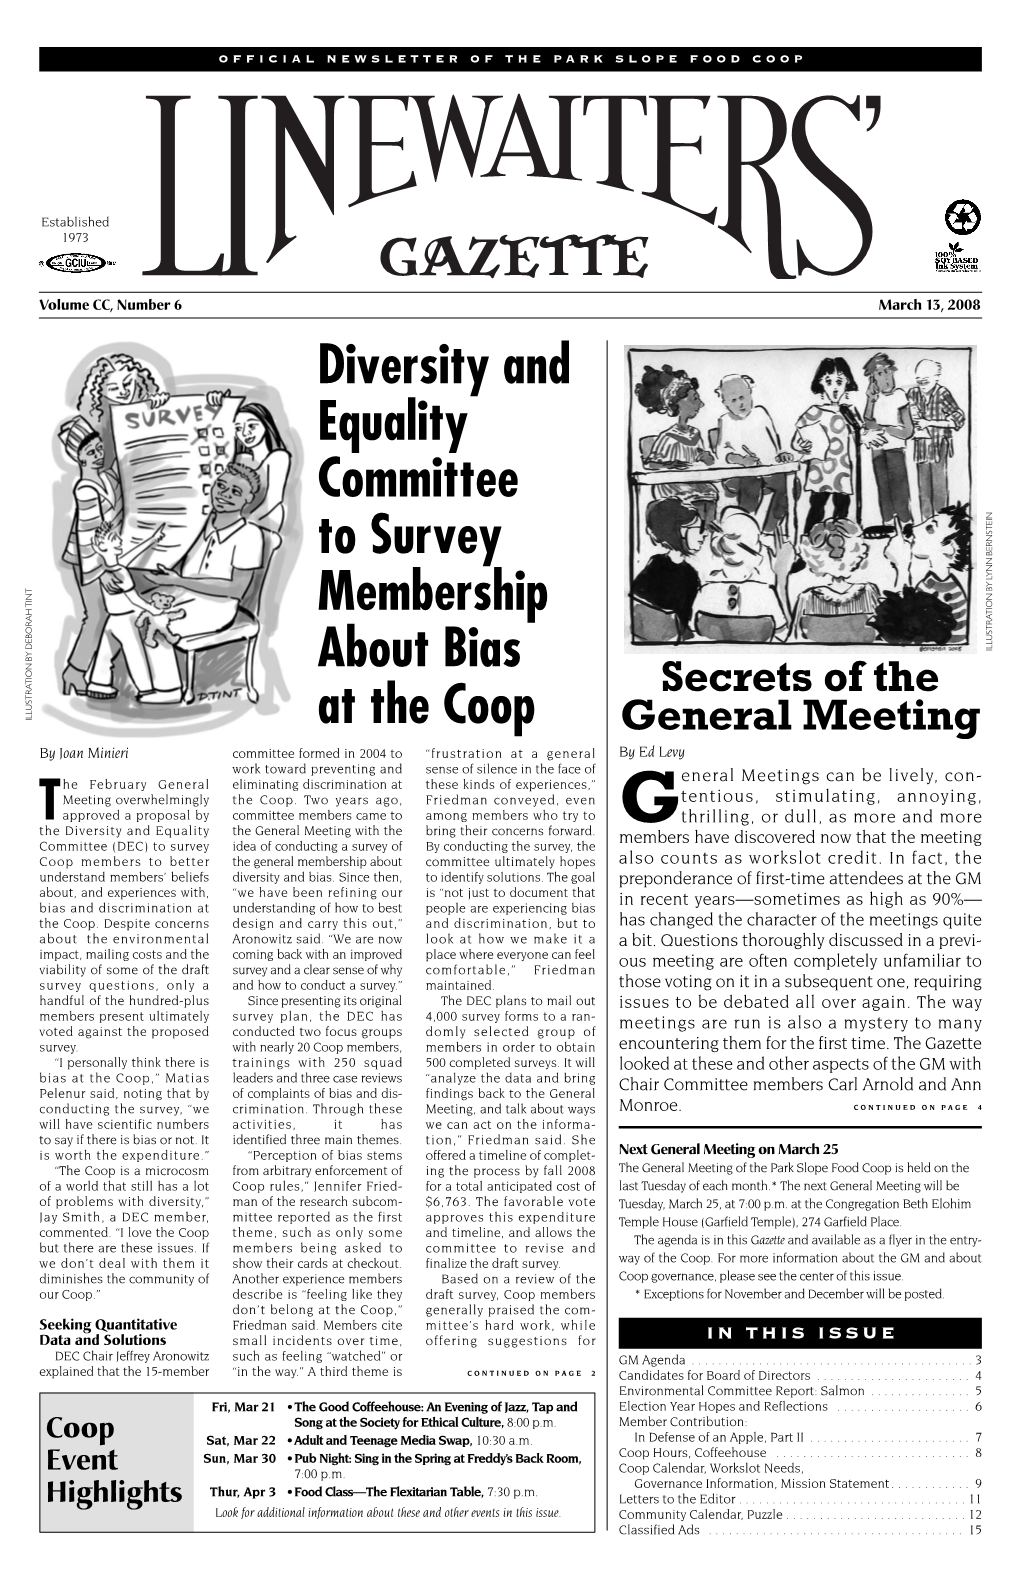 Diversity and Equality Committee to Survey Membership About Bias At